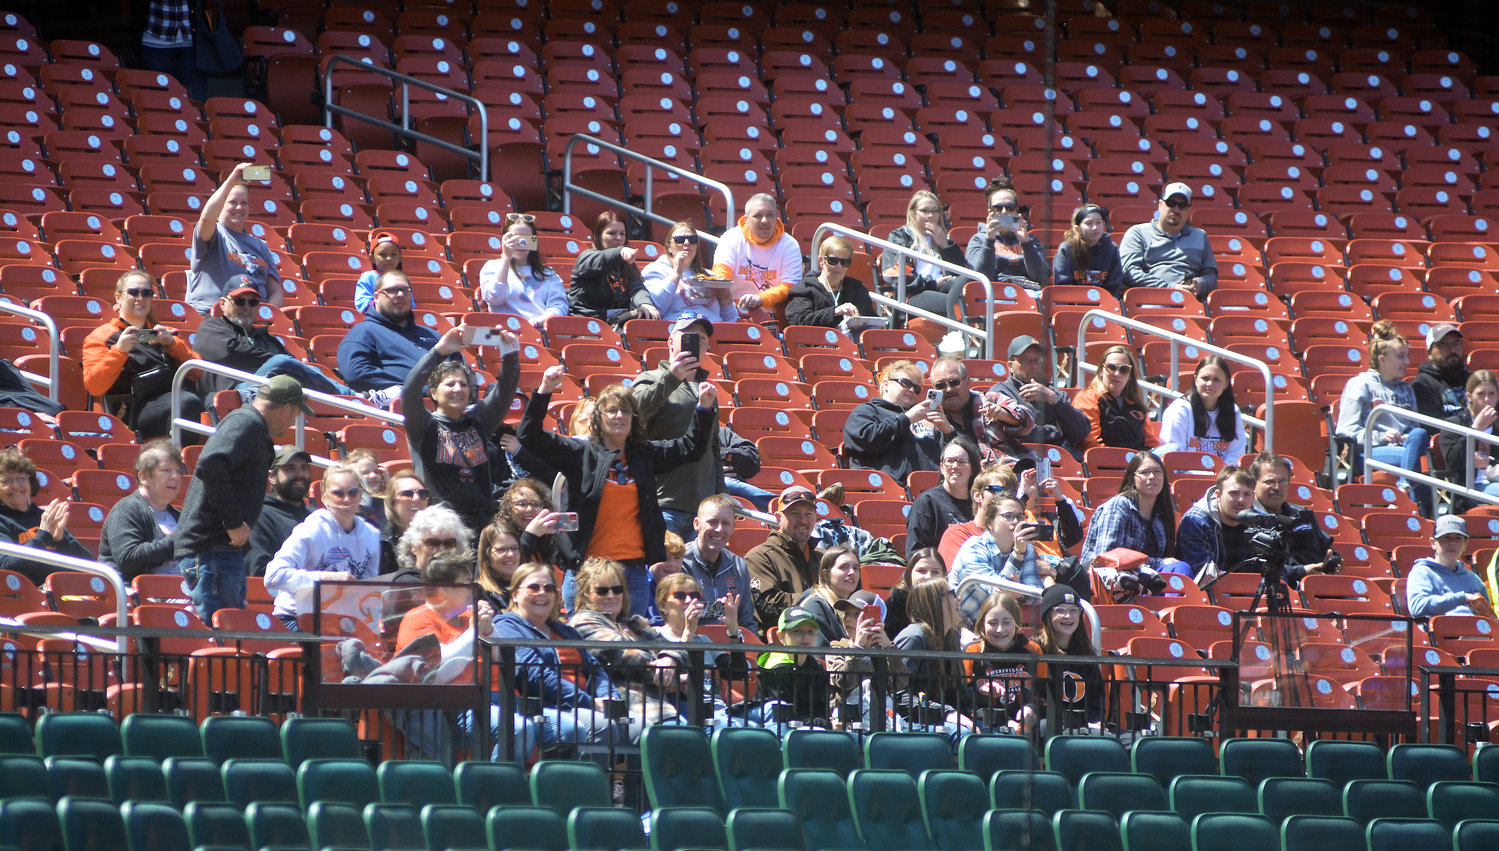 Nearly 200 Owensville Dutchmen baseball fans made the trip to downtown St. Louis on Saturday to watch the orange and black play at Busch Stadium for the first time in nearly 30 years. Fans witnessed Tyler Ahring’s OHS baseball team defeat Roxana High School’s Shells, 11-5, running their record to 5-5-1 on the season. See Sports.